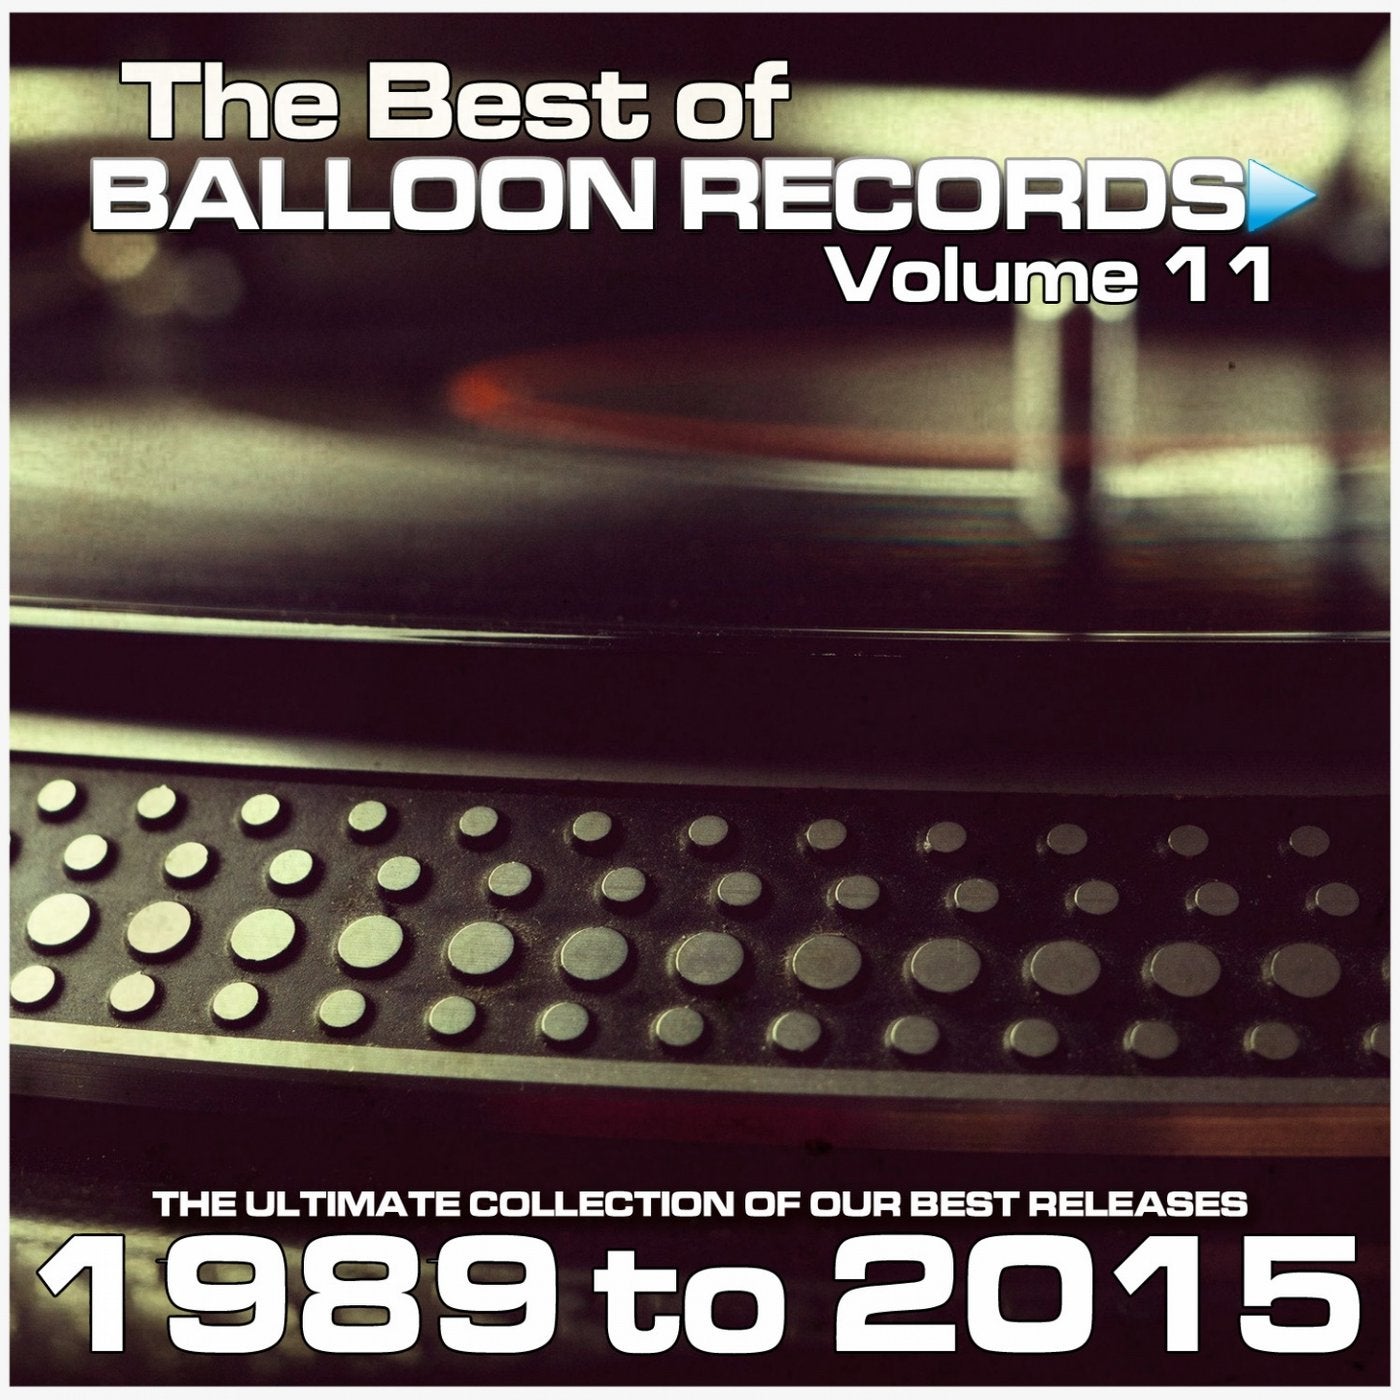 Best of Balloon Records 11 (The Ultimate Collection of Our Best Releases, 1989 to 2015)